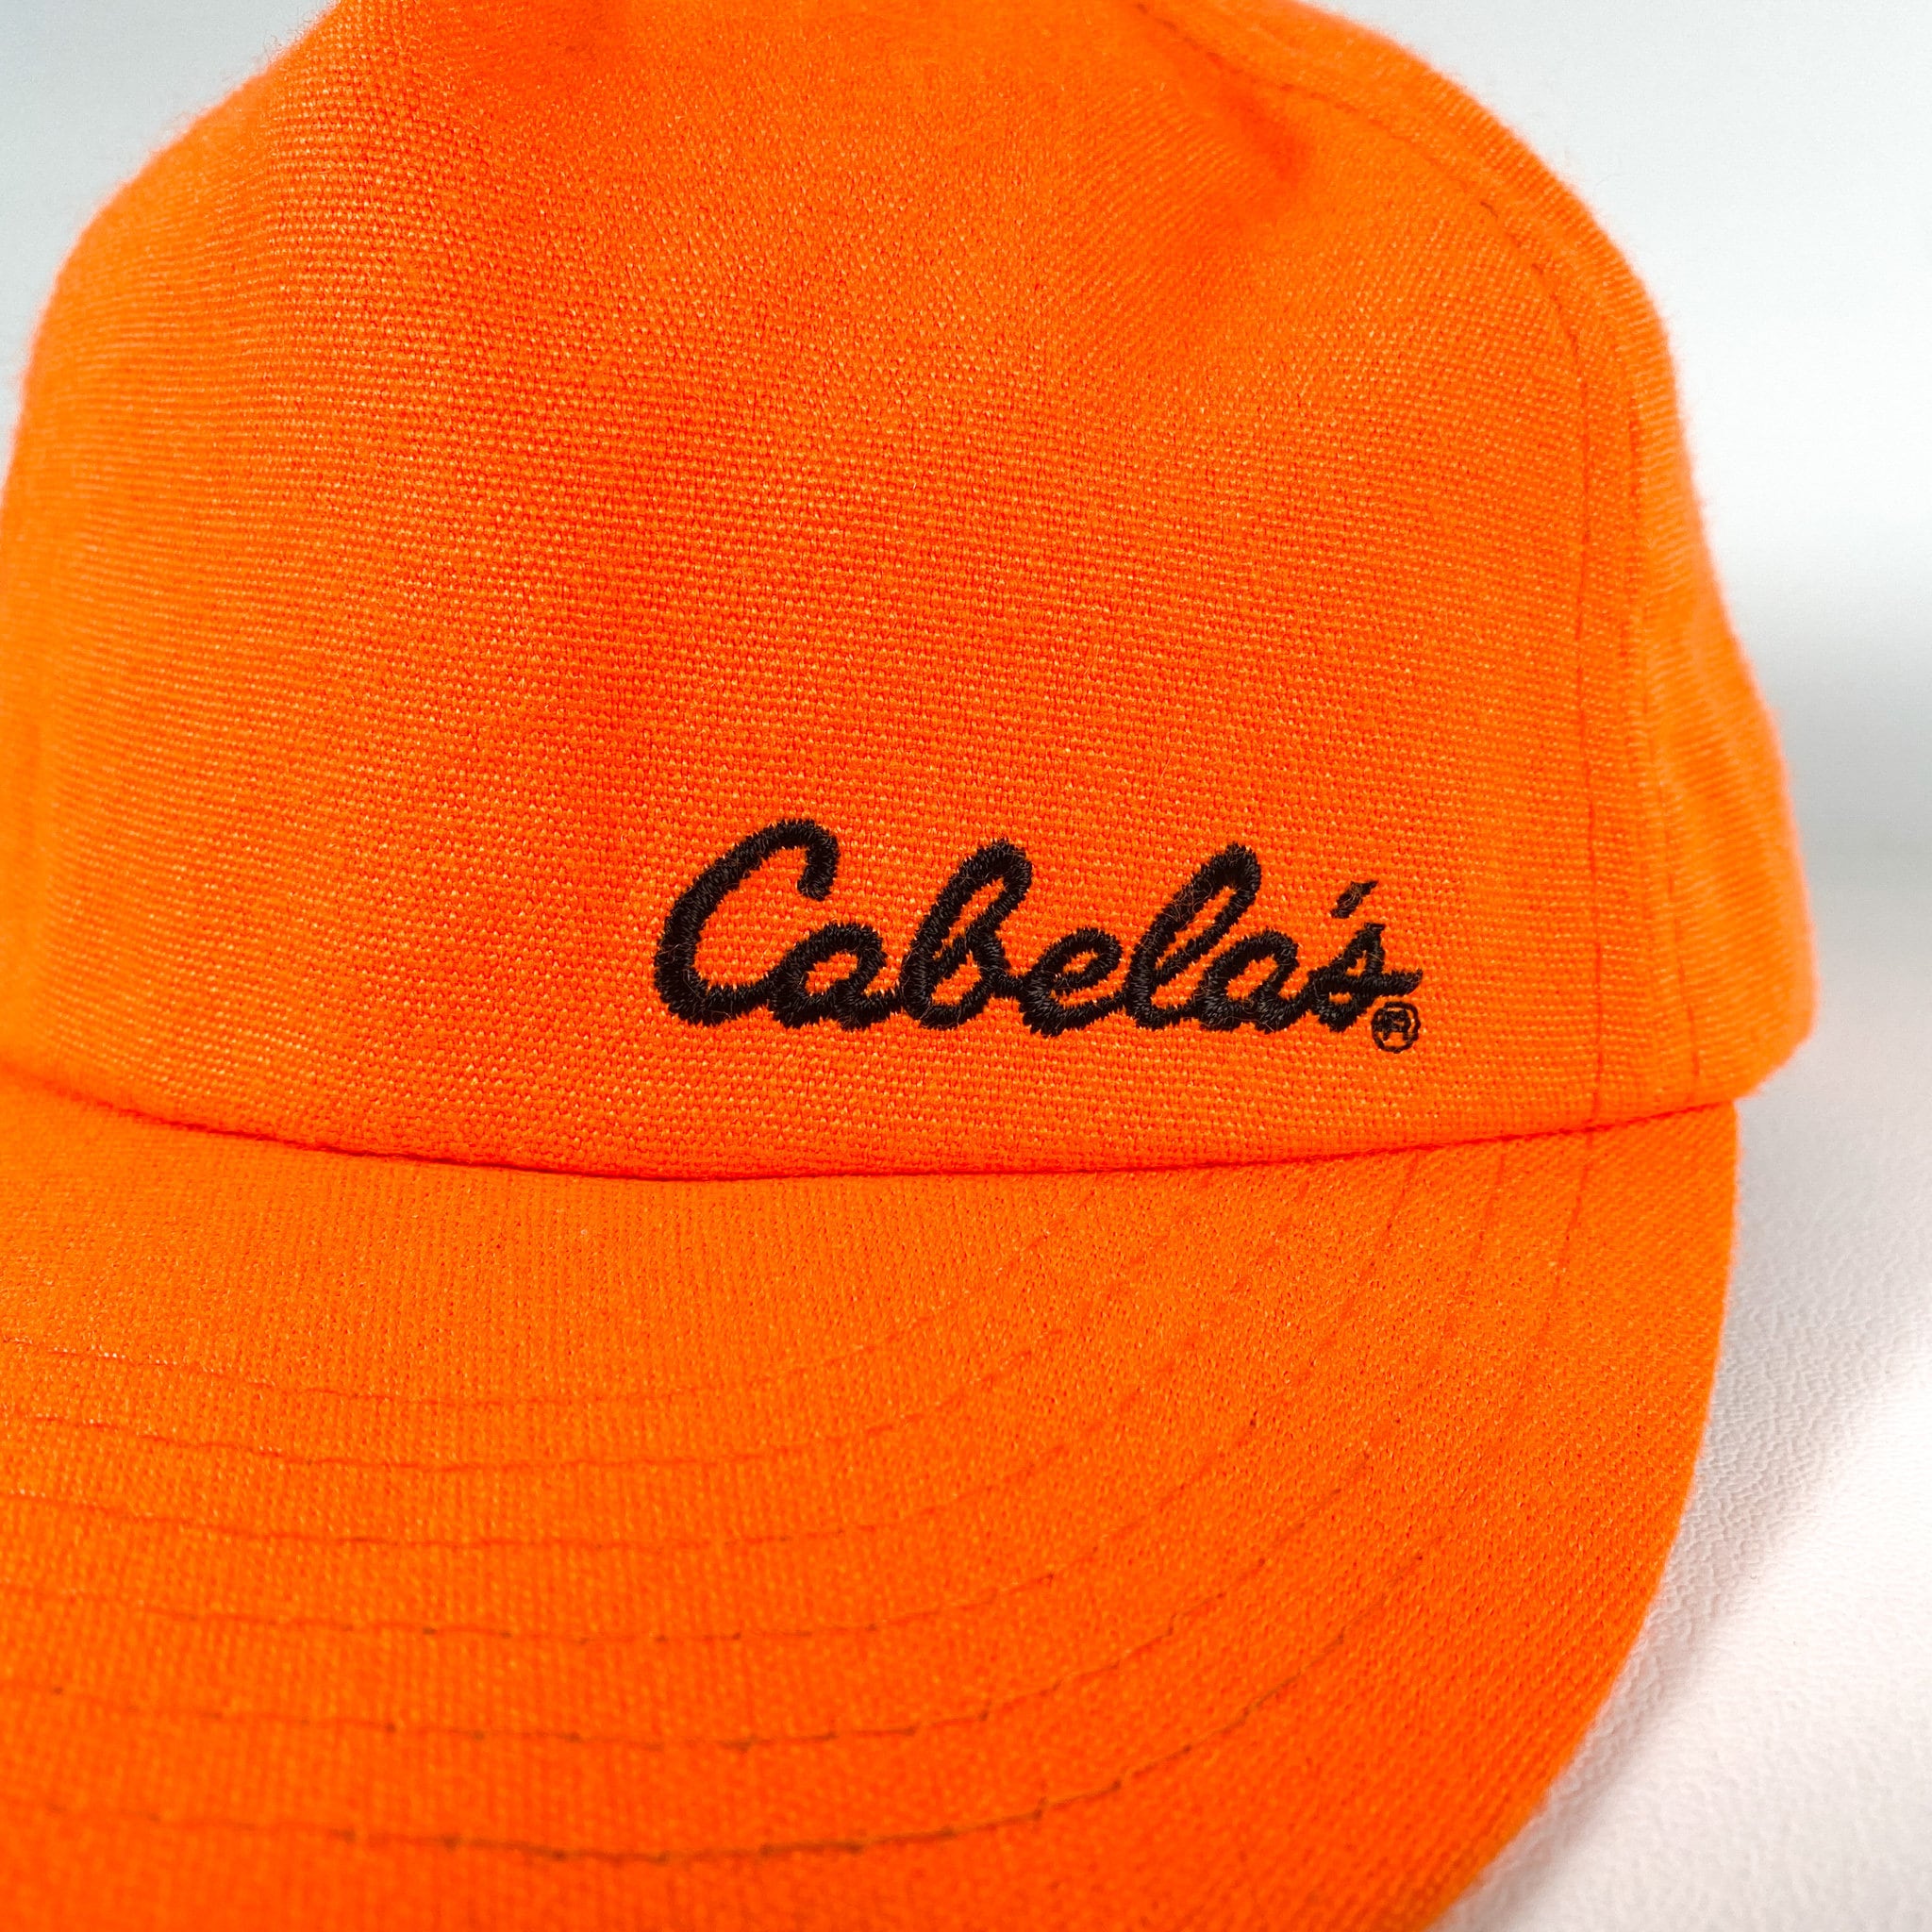 Vintage Cabelas Hat 90s Cabelas Hat Vintage Cabelas Hat Fishing Hat Vintage Fishing Hat Safety Orange Hat Made in USA Fisherman Hat Neon Hat